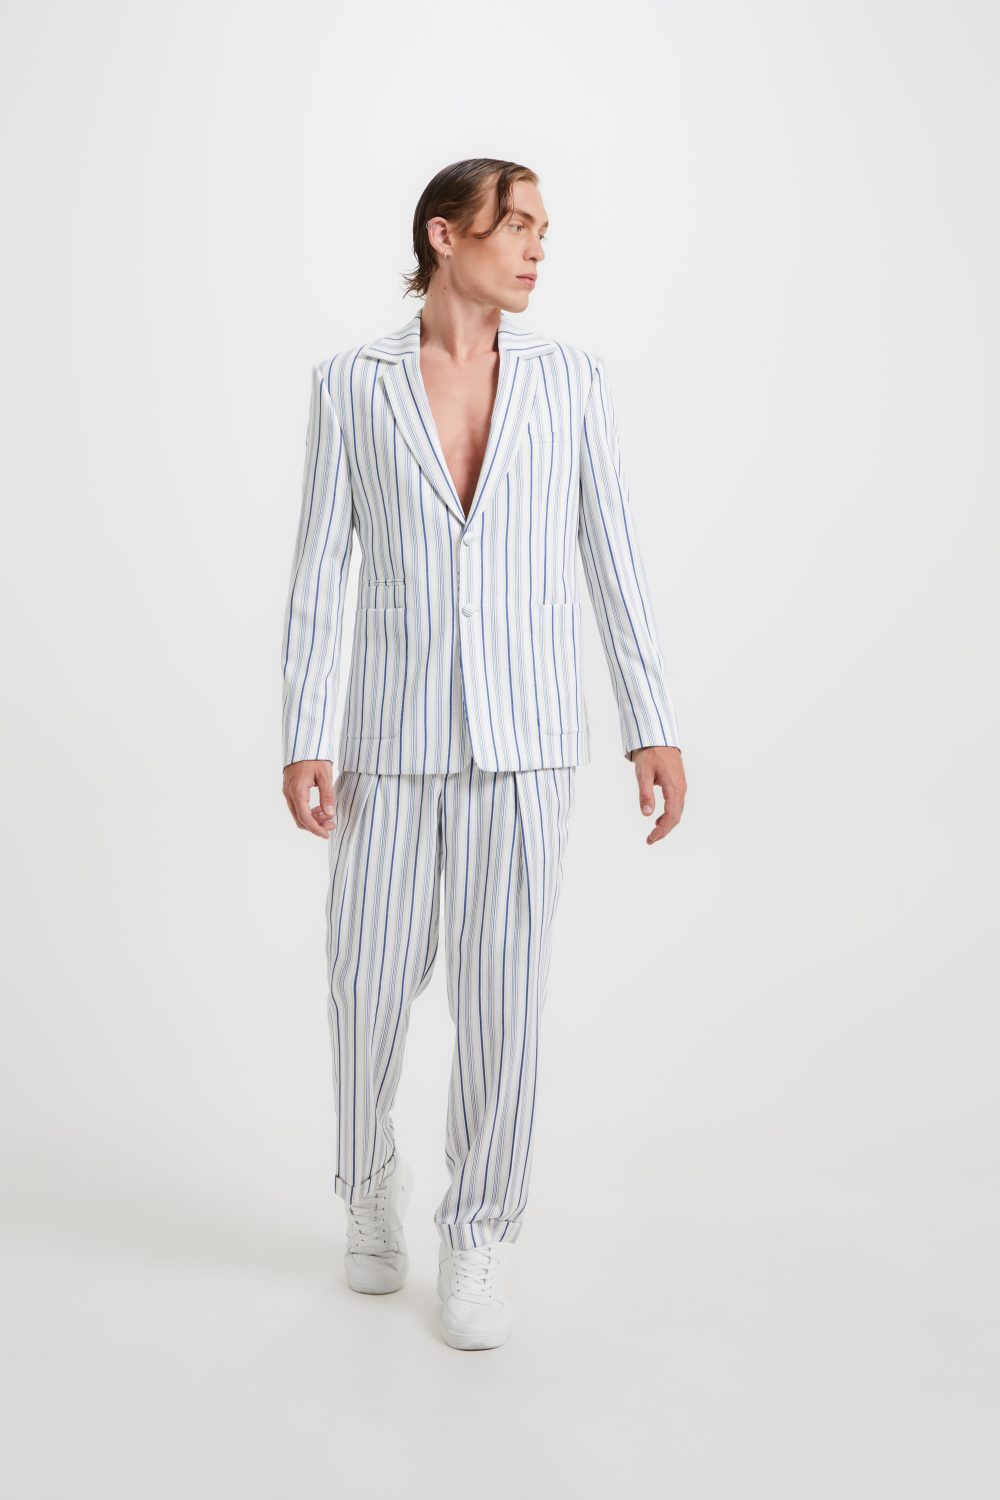 SUITS NICKY WHITE WITH LIGHT BLUE PINSTRIPES